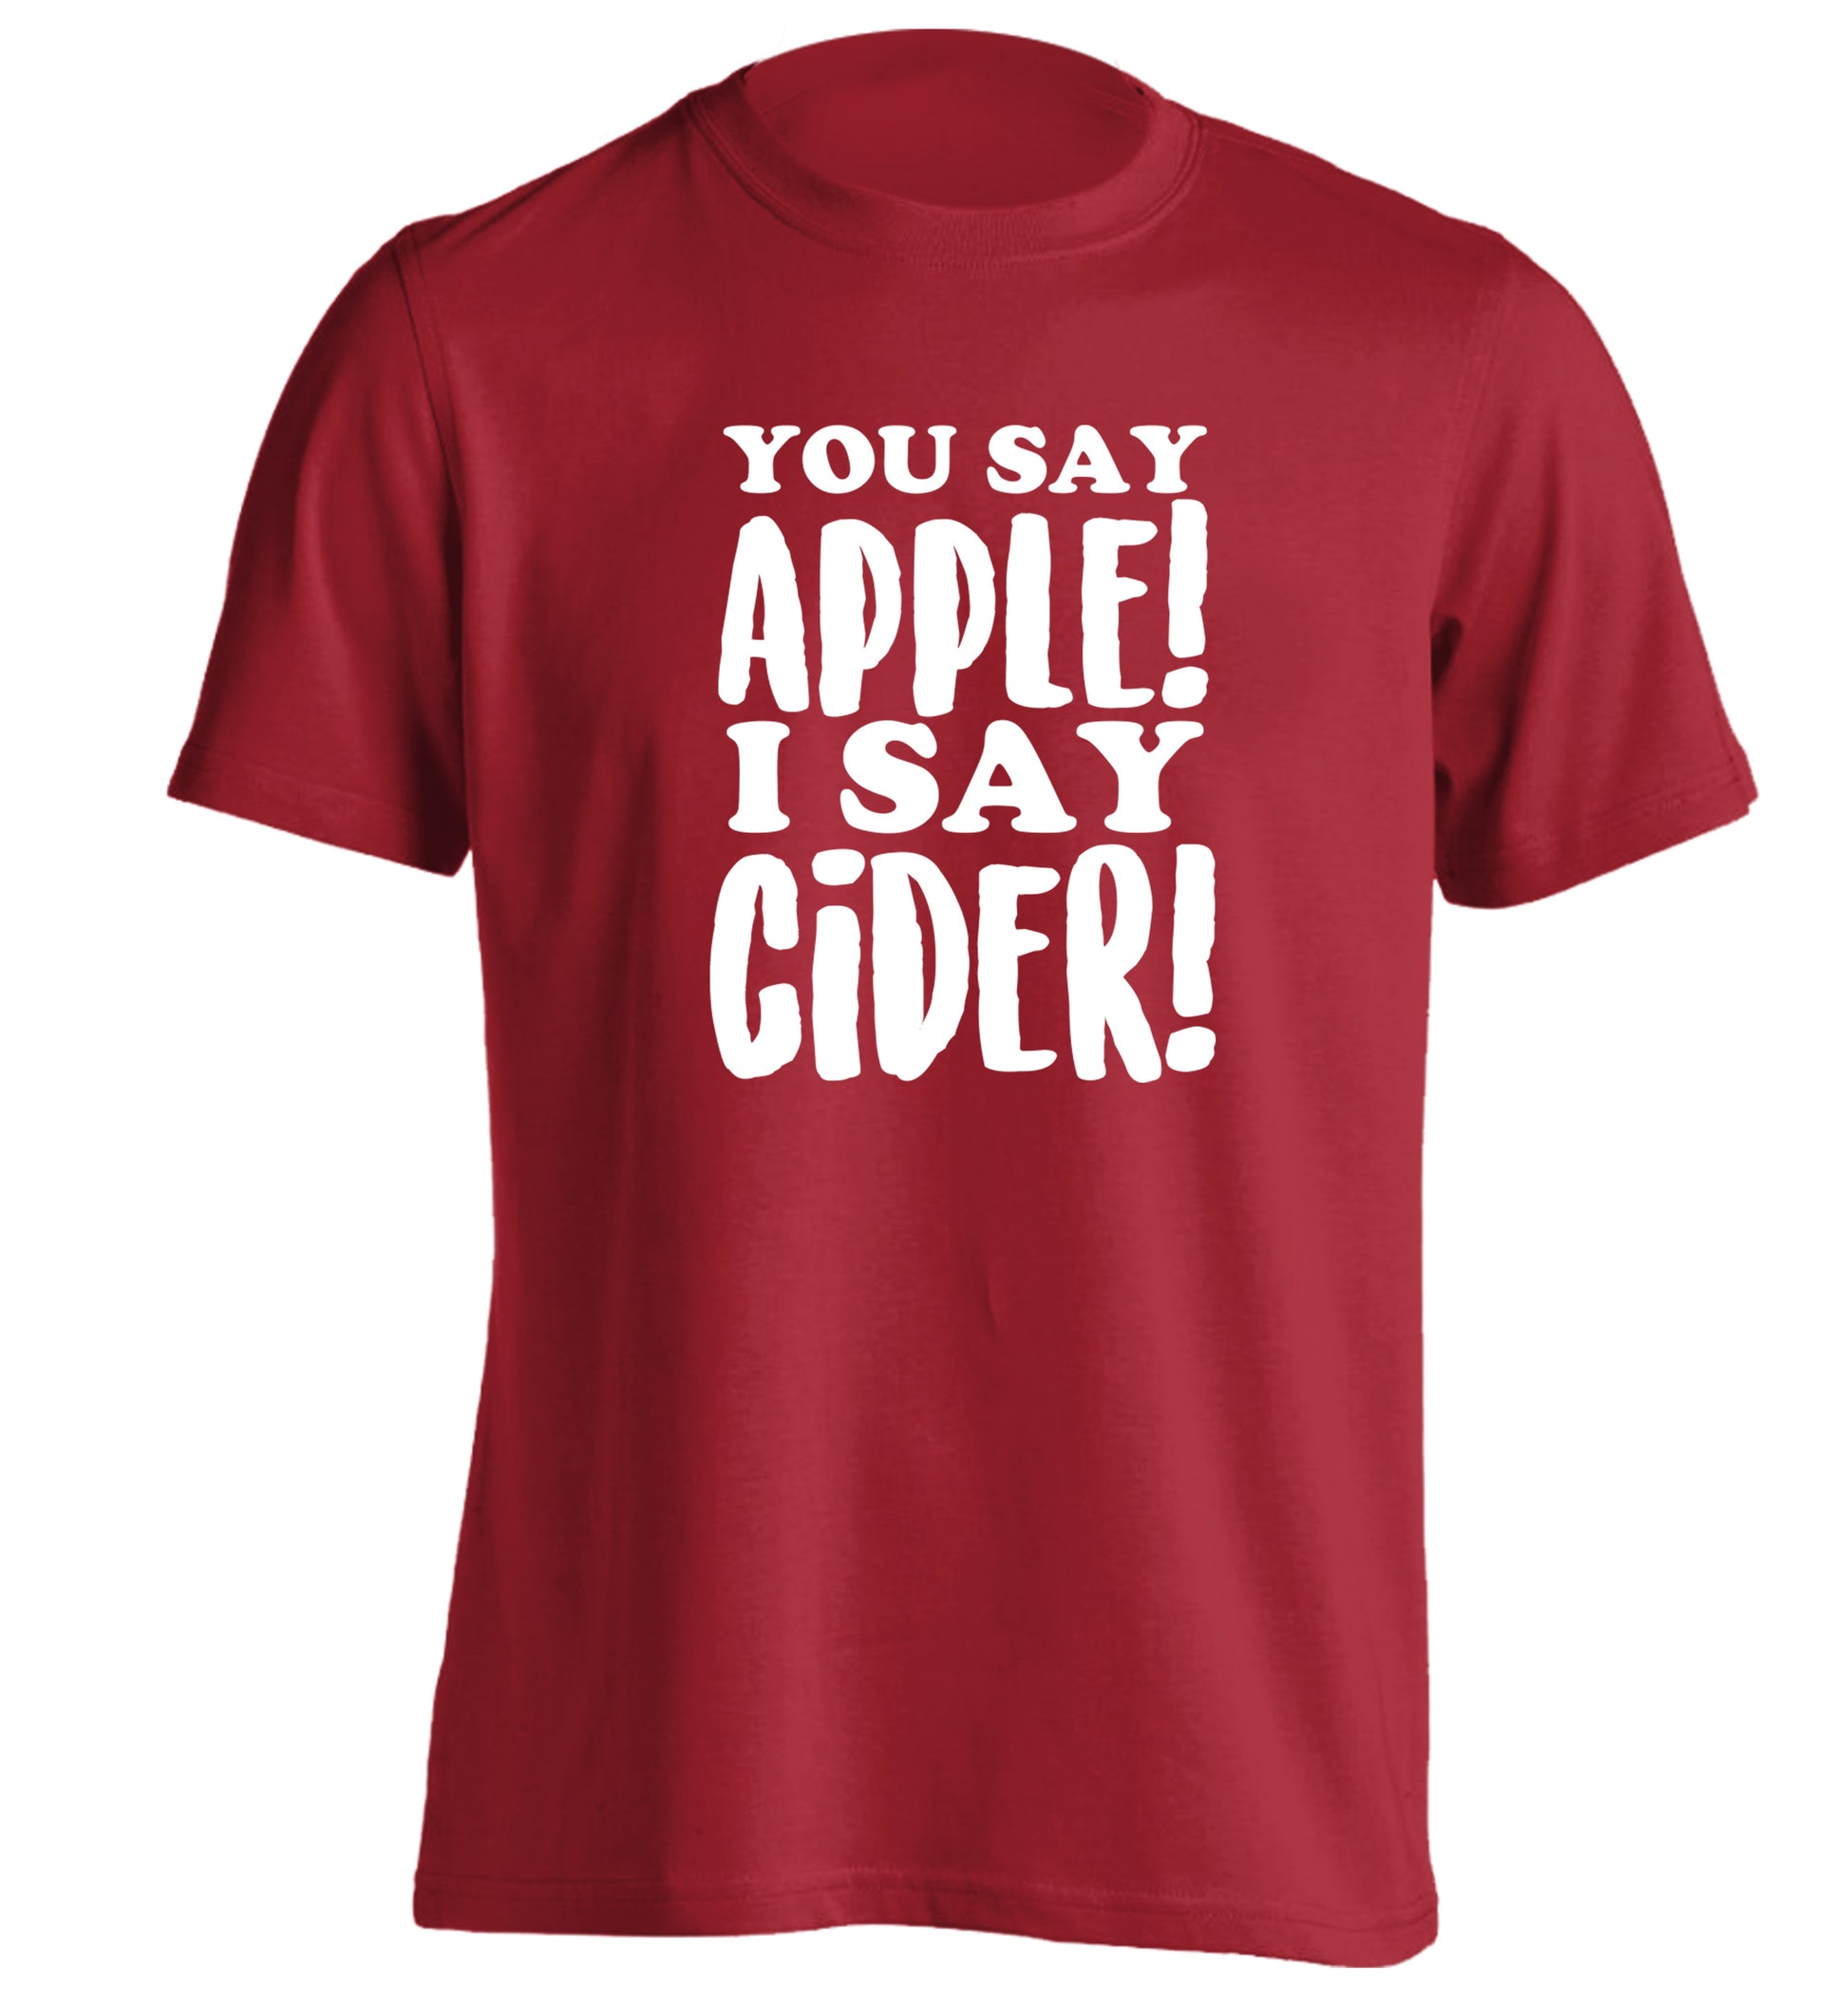 You say apple I say cider! adults unisex red Tshirt 2XL